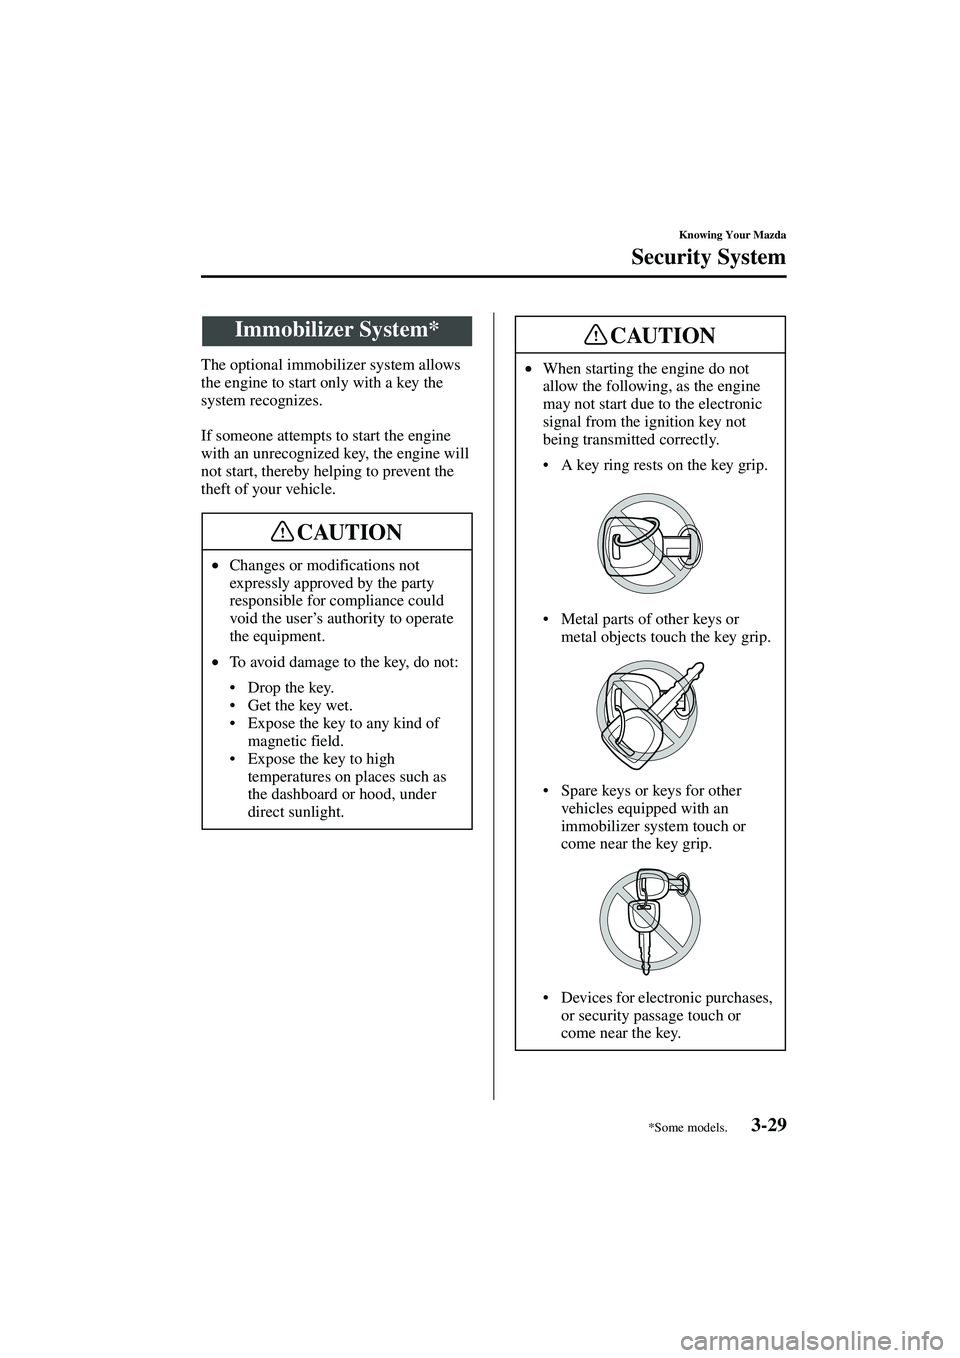 MAZDA MODEL MX-5 MIATA 2004  Owners Manual 3-29
Knowing Your Mazda
Form No. 8S15-EA-03G
Security System
The optional immobilizer system allows 
the engine to start only with a key the 
system recognizes.
If someone attempts to start the engine